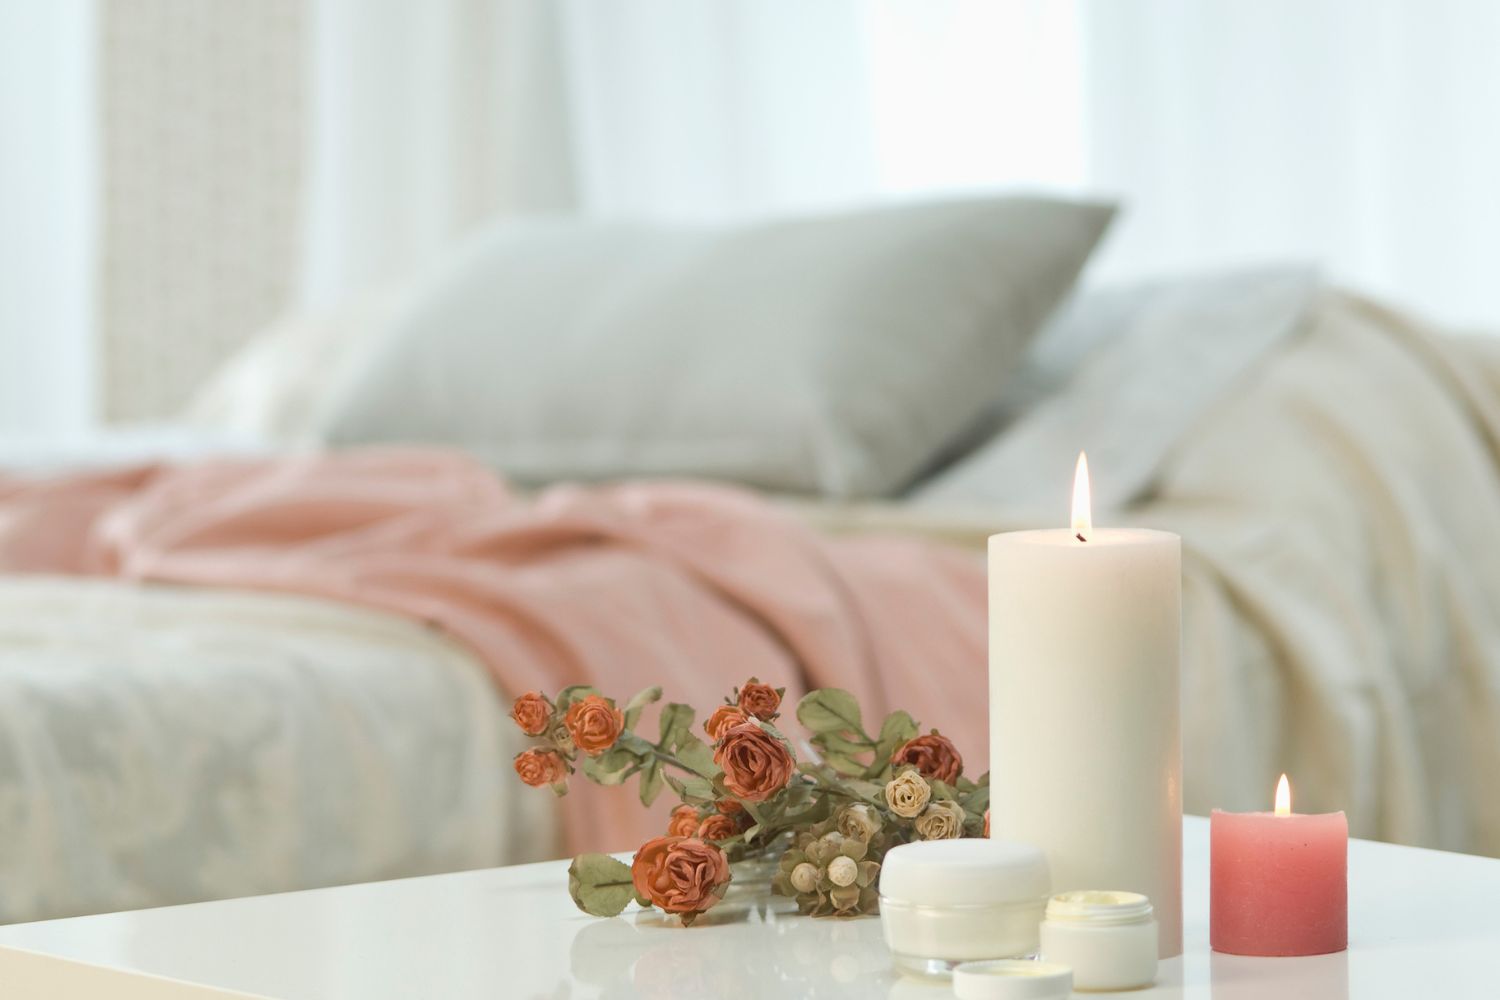 Set the scene with comfy bedding and some candles.